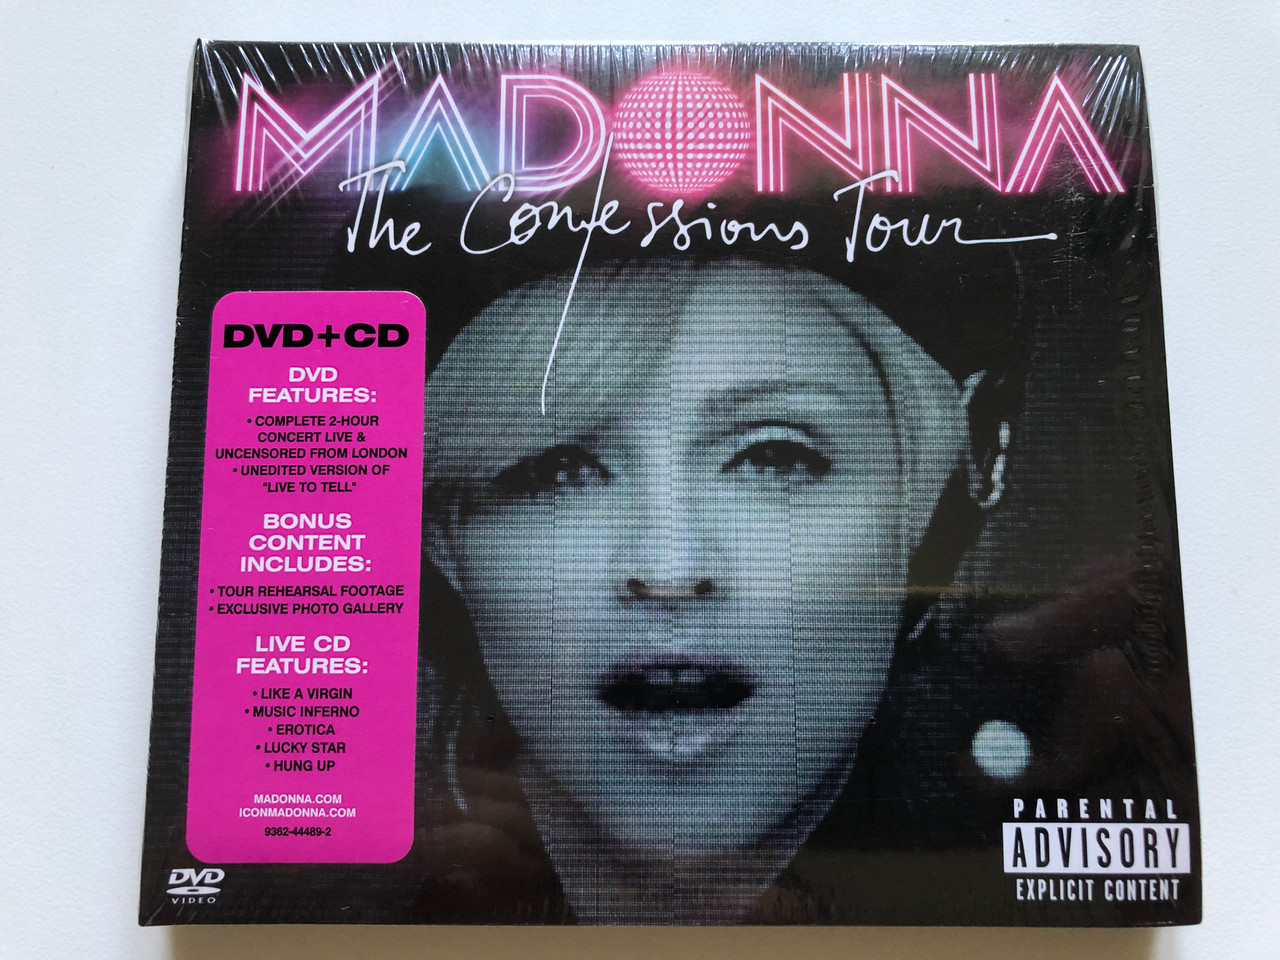 Madonna - The Confessions Tour / DVD + CD / DVD Features: Complete 2-Hour  Concert Live & Uncensored